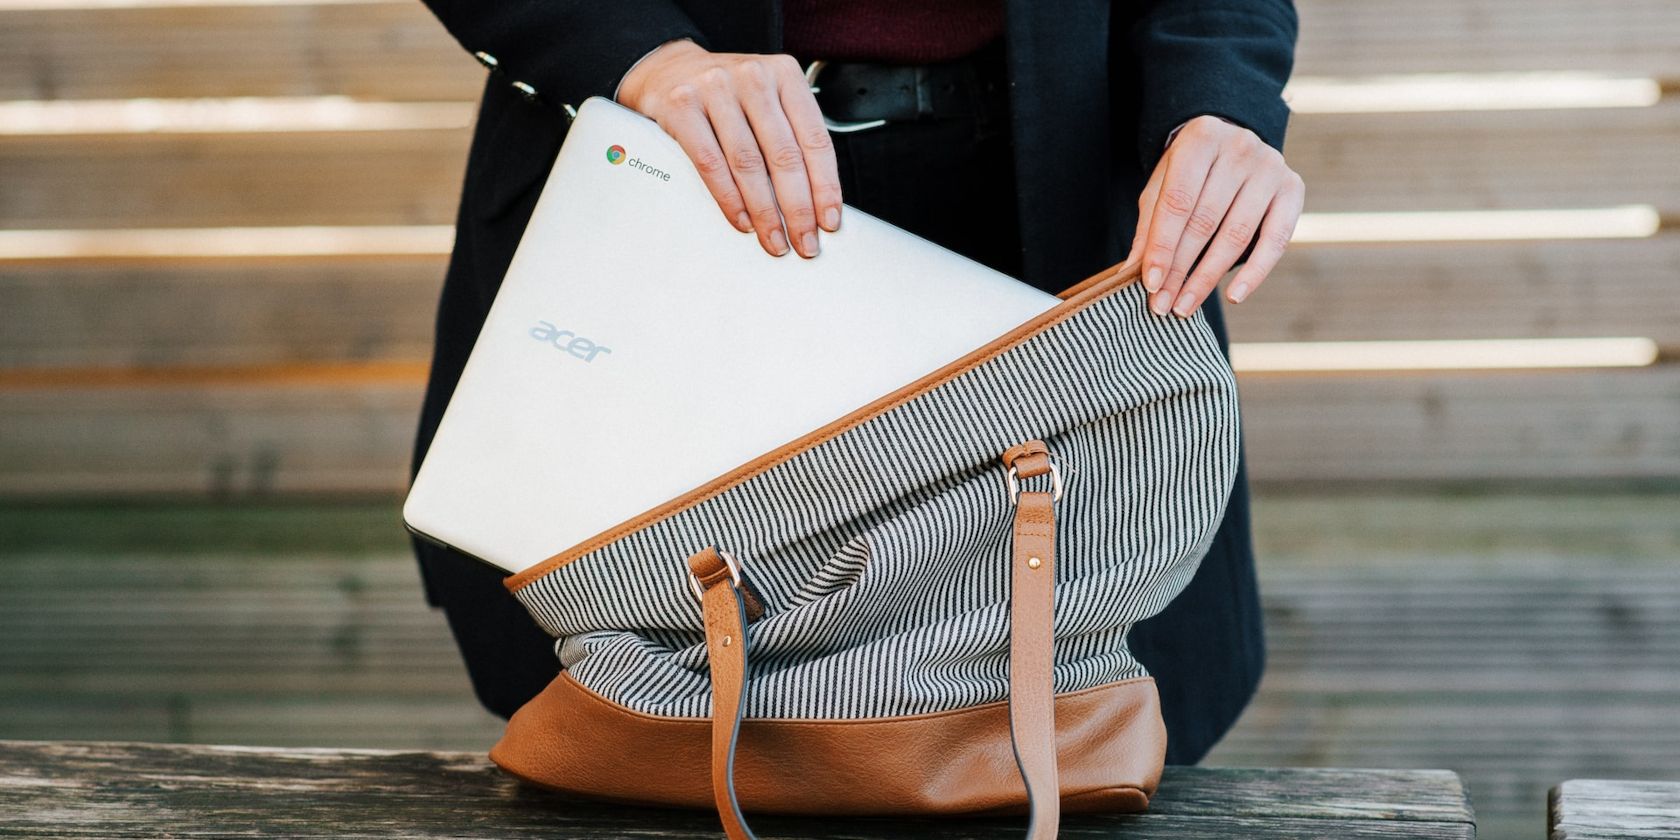 chromebook being put into a bag